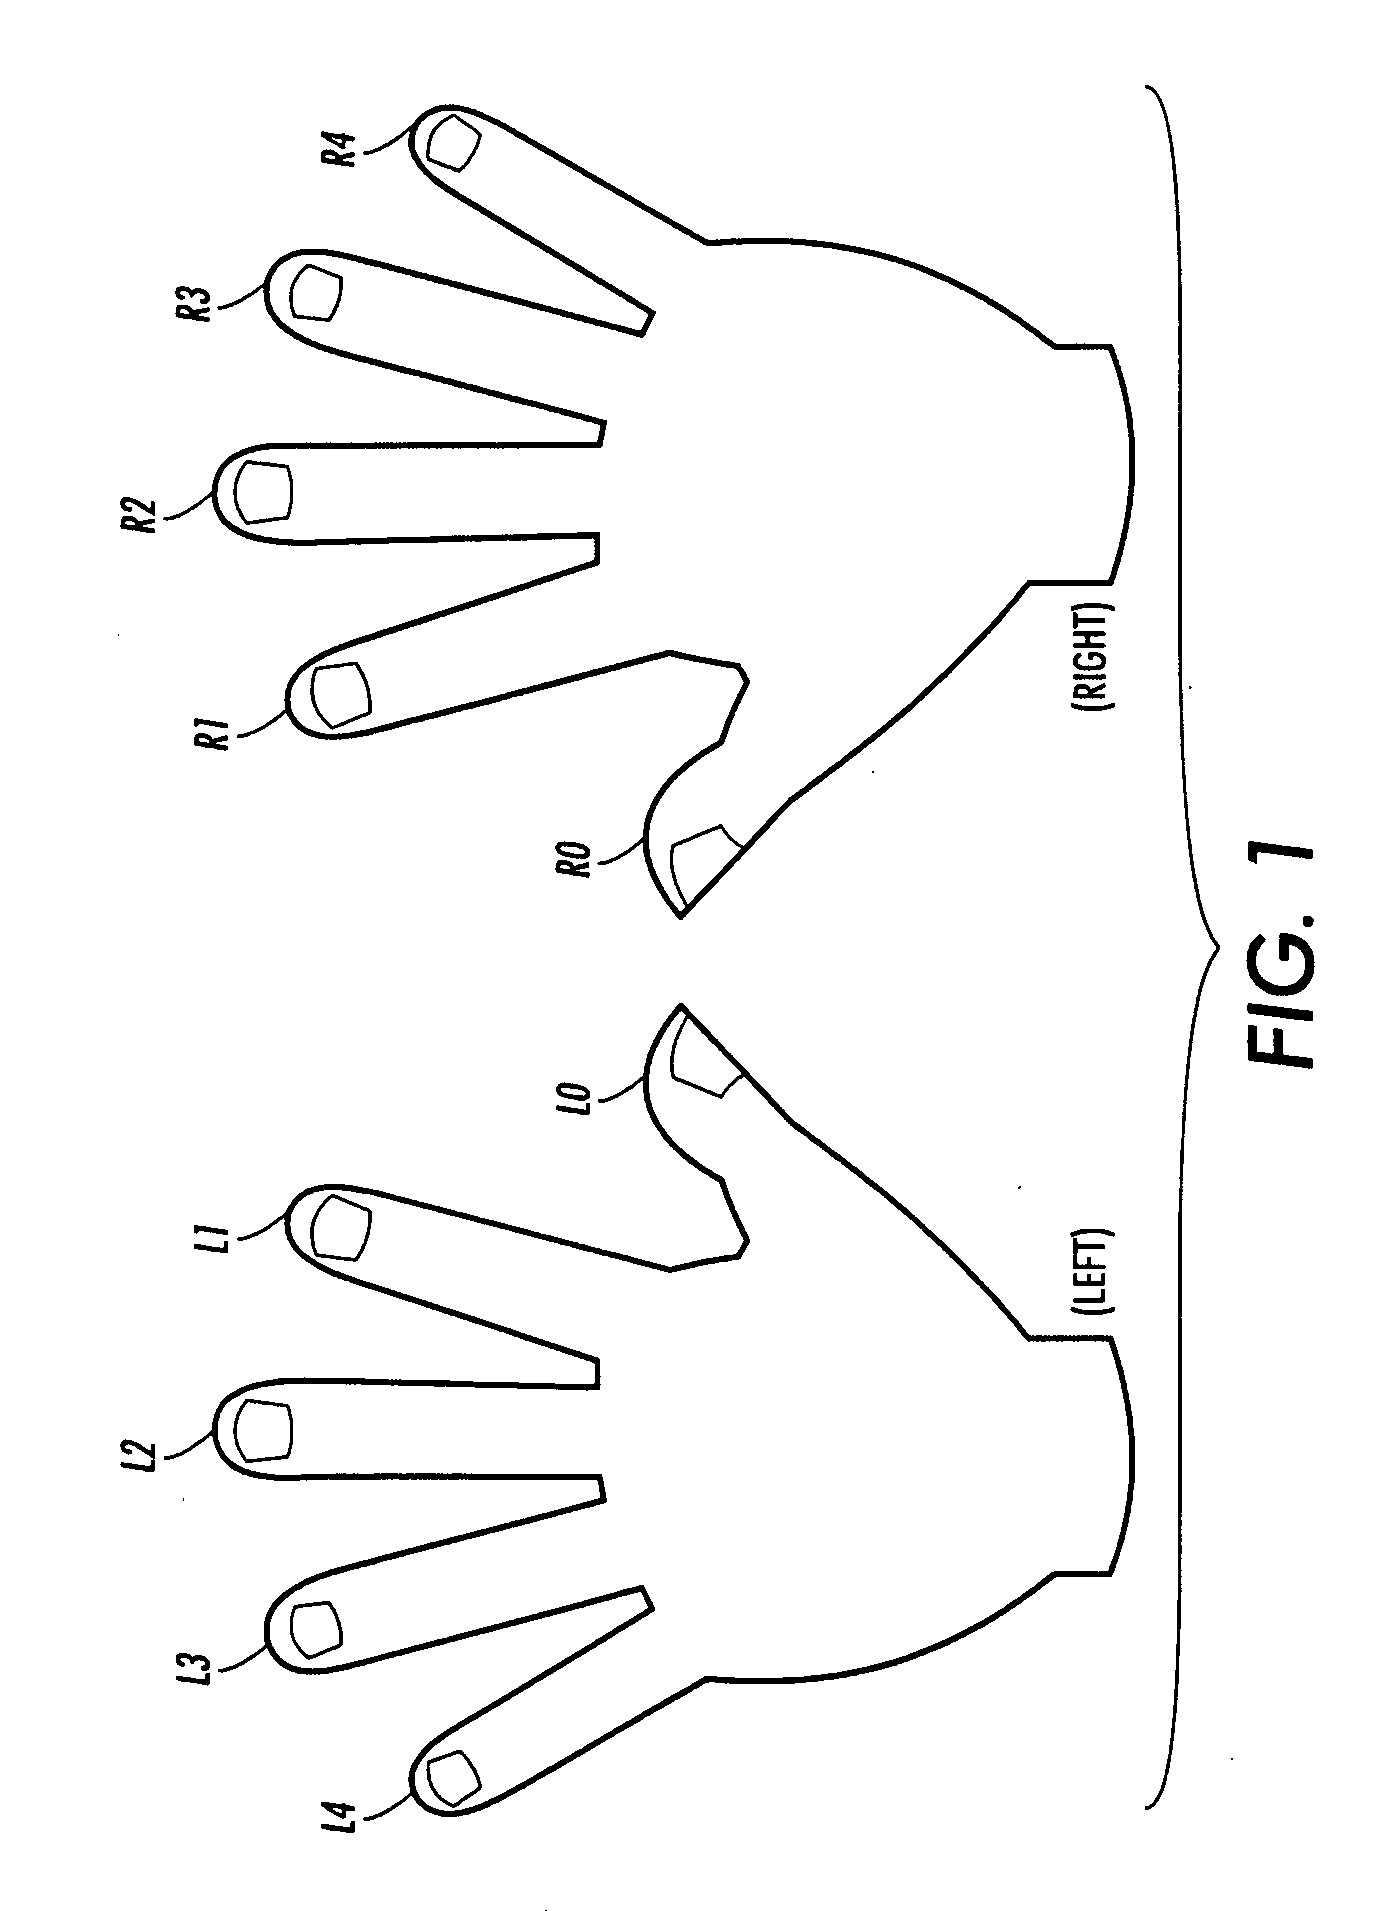 Fingerprint scan order sequence to configure a print system device